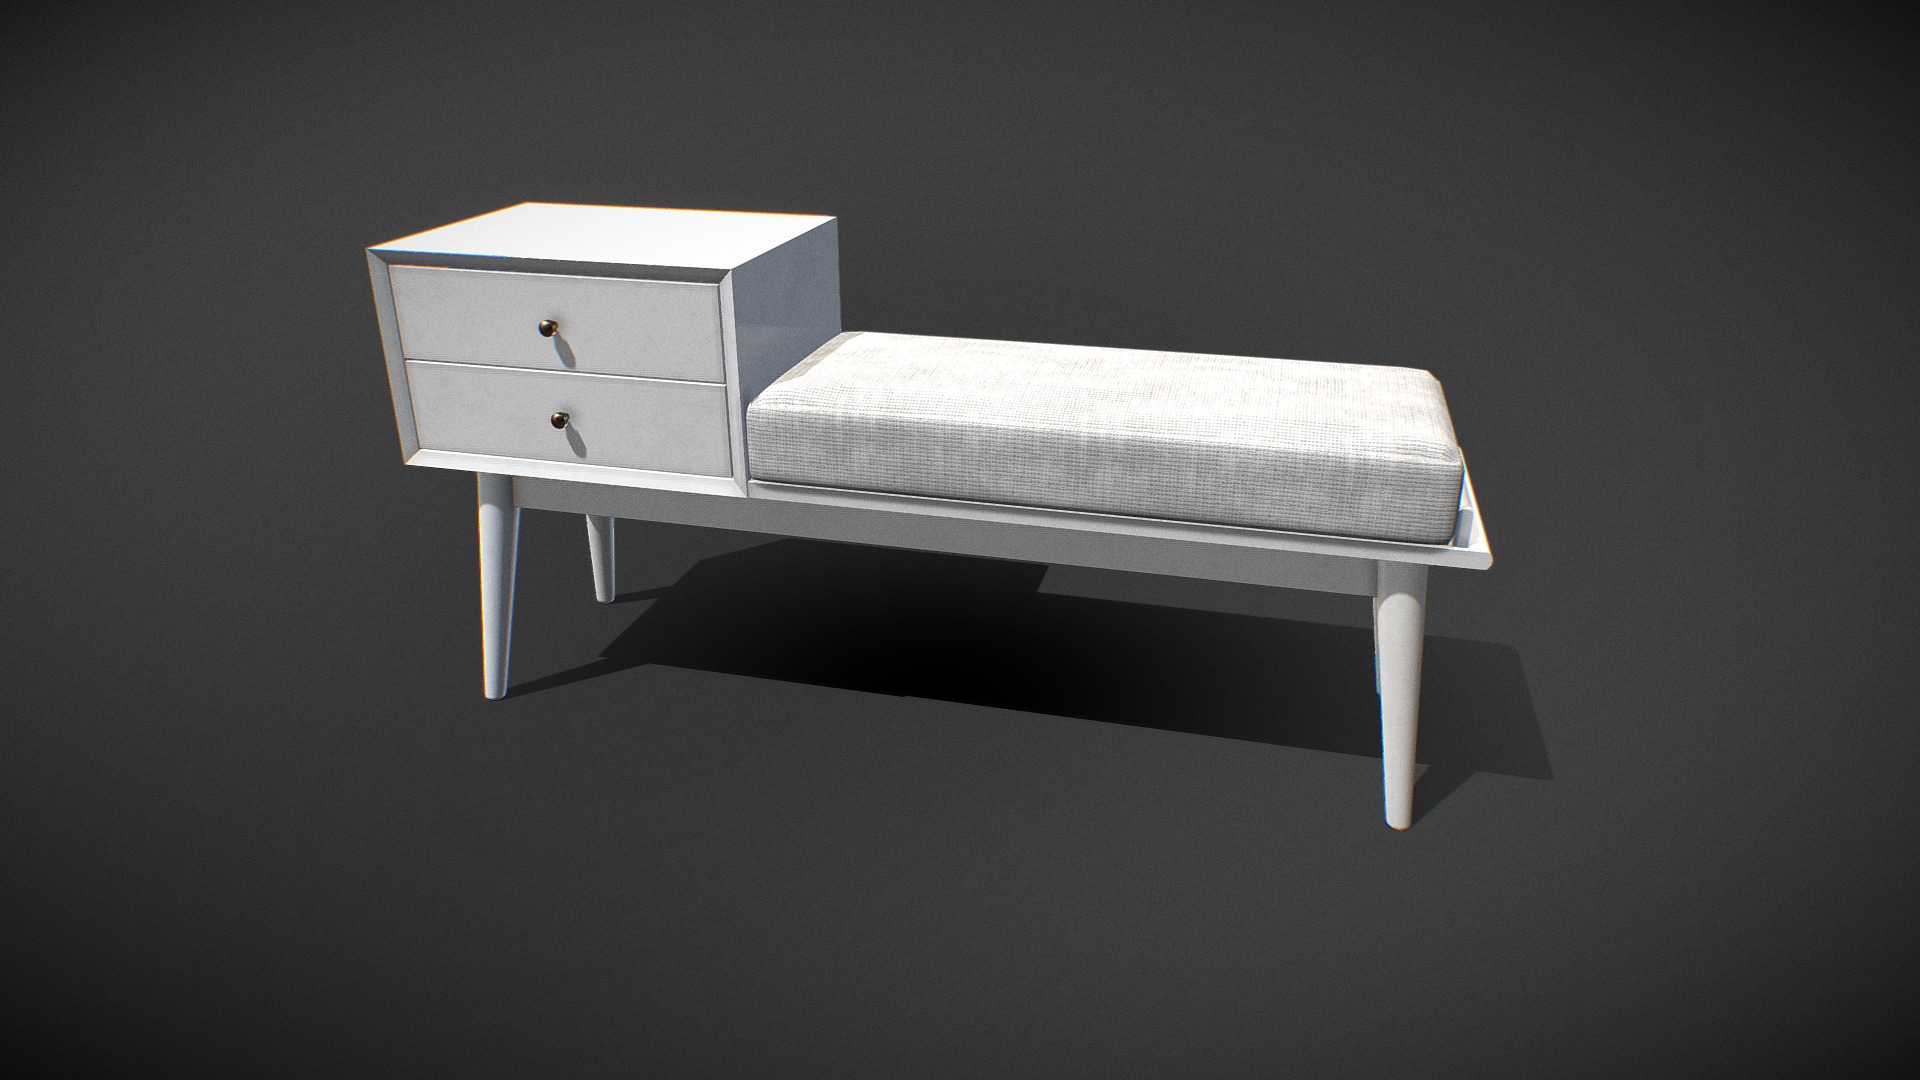 3D model Landon Entryway Bench v01 - This is a 3D model of the Landon Entryway Bench v01. The 3D model is about a white bed with a white pillow.